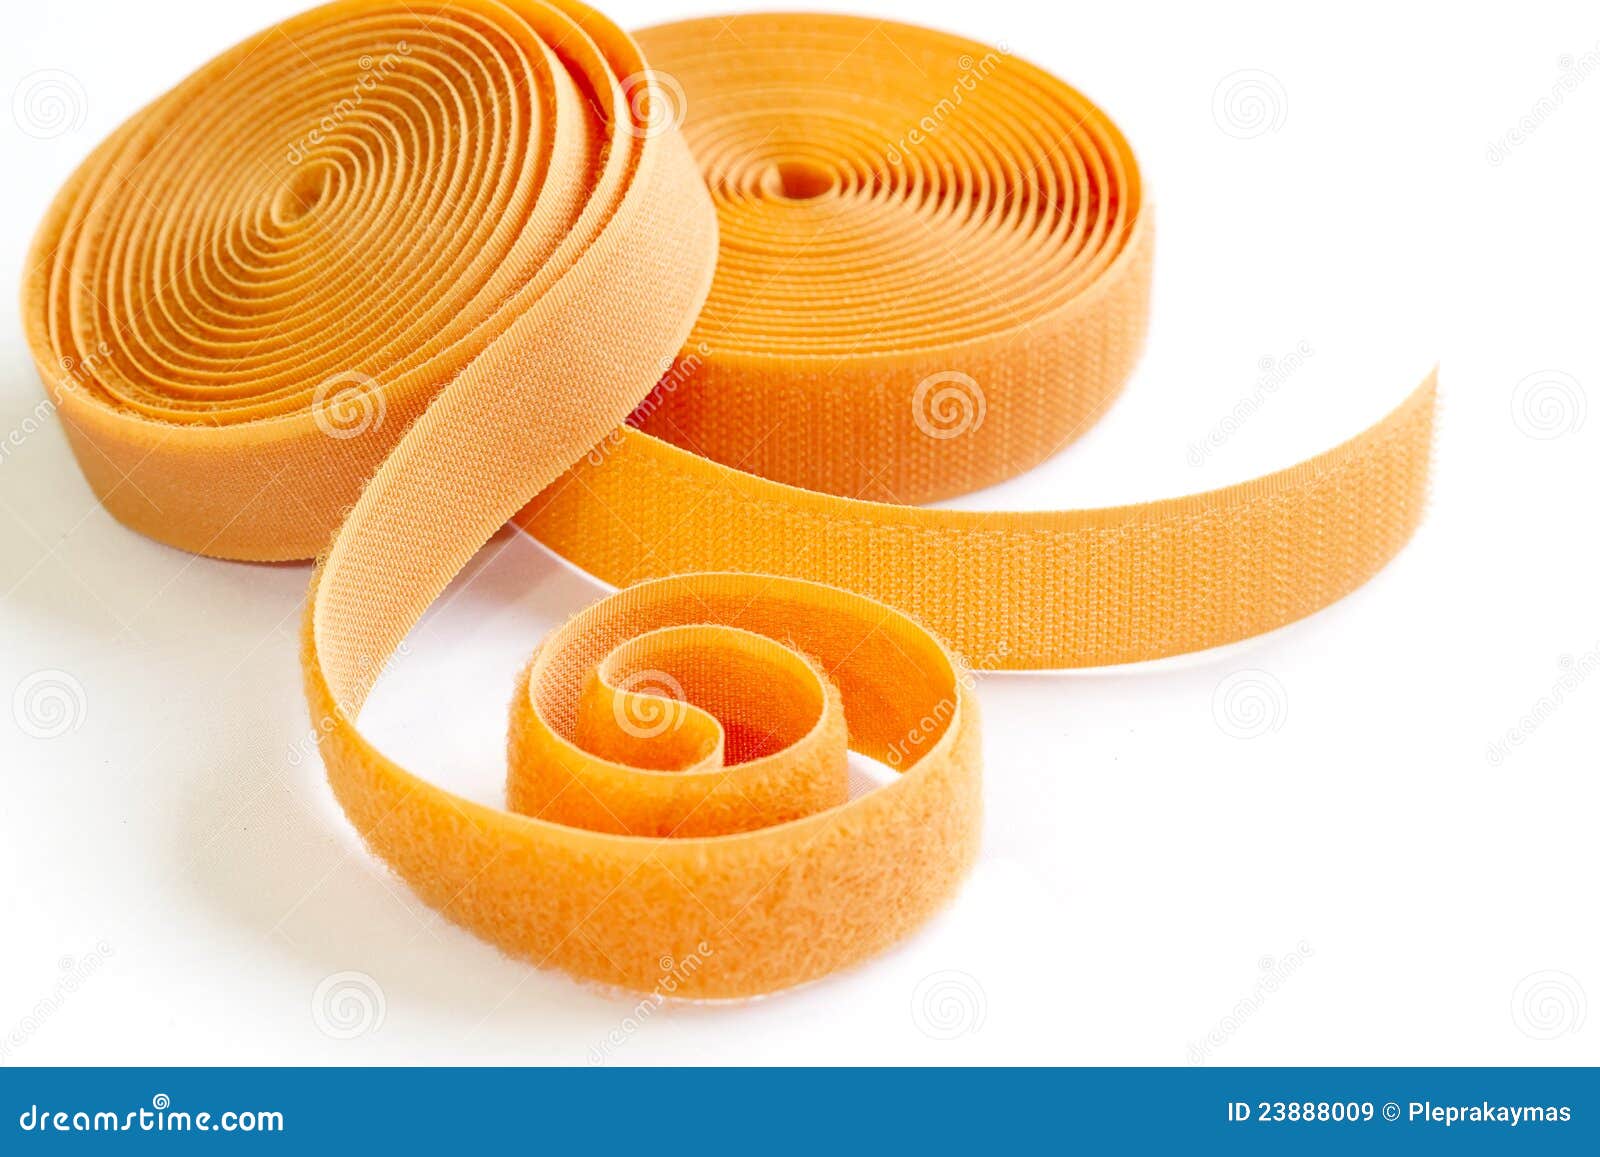 Two roll of Velcro stock image. Image of textile, merge - 23888009